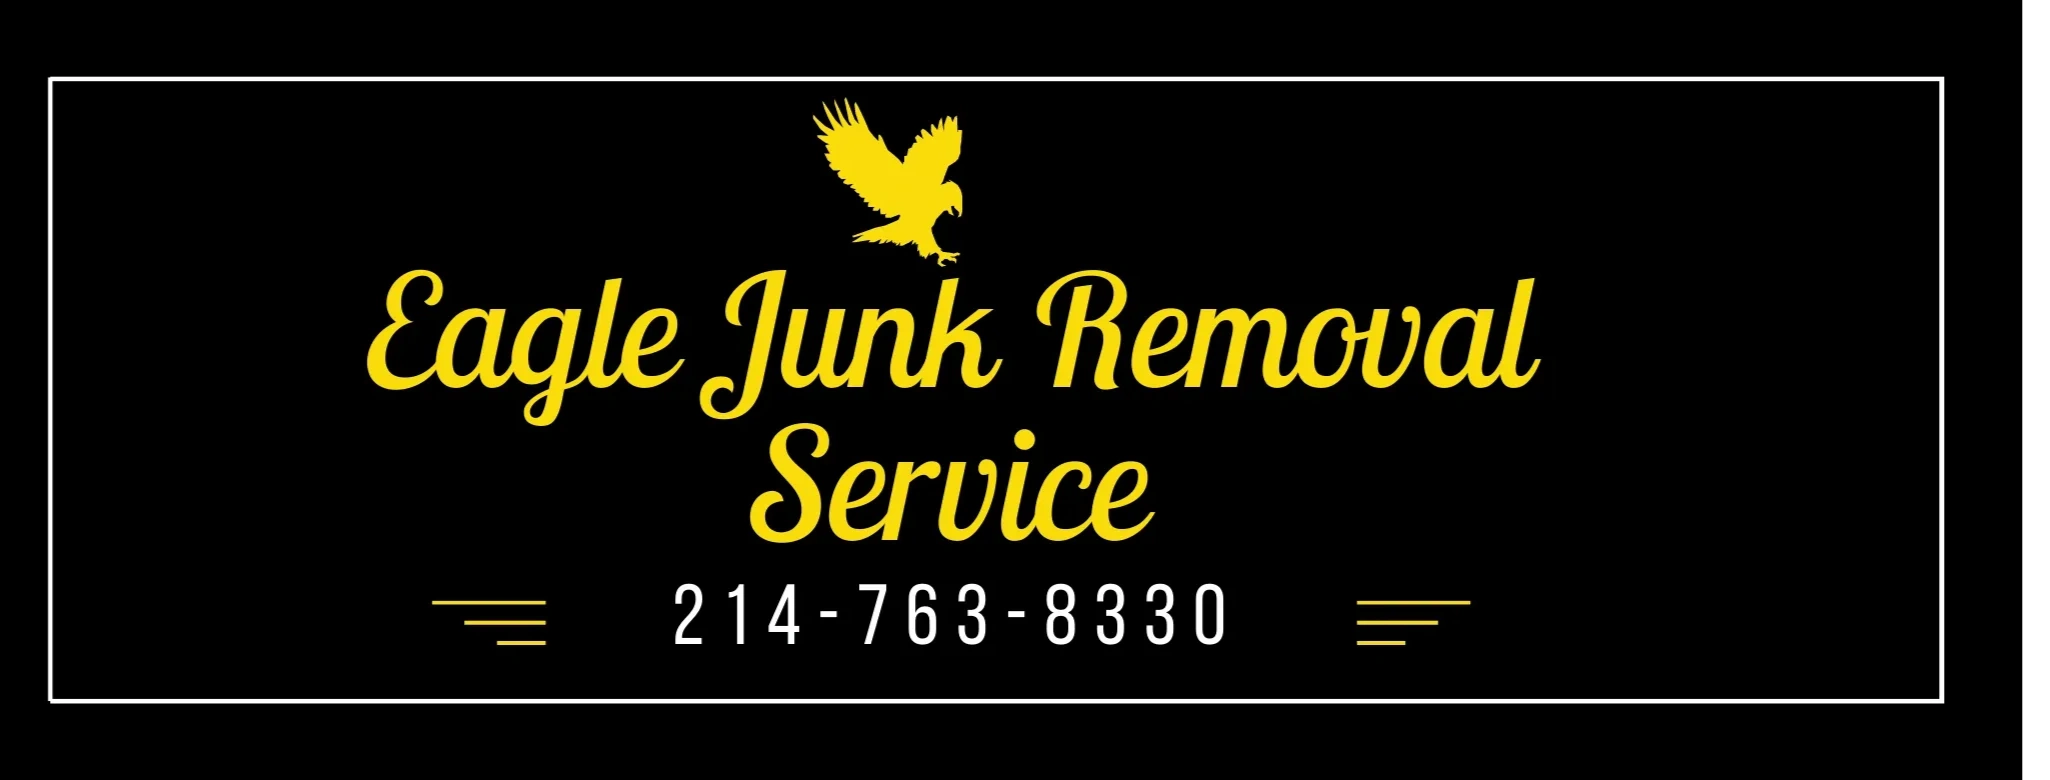 Junk removal in fort worth, waste management fort worth, furniture removal fort worth, bulky trash